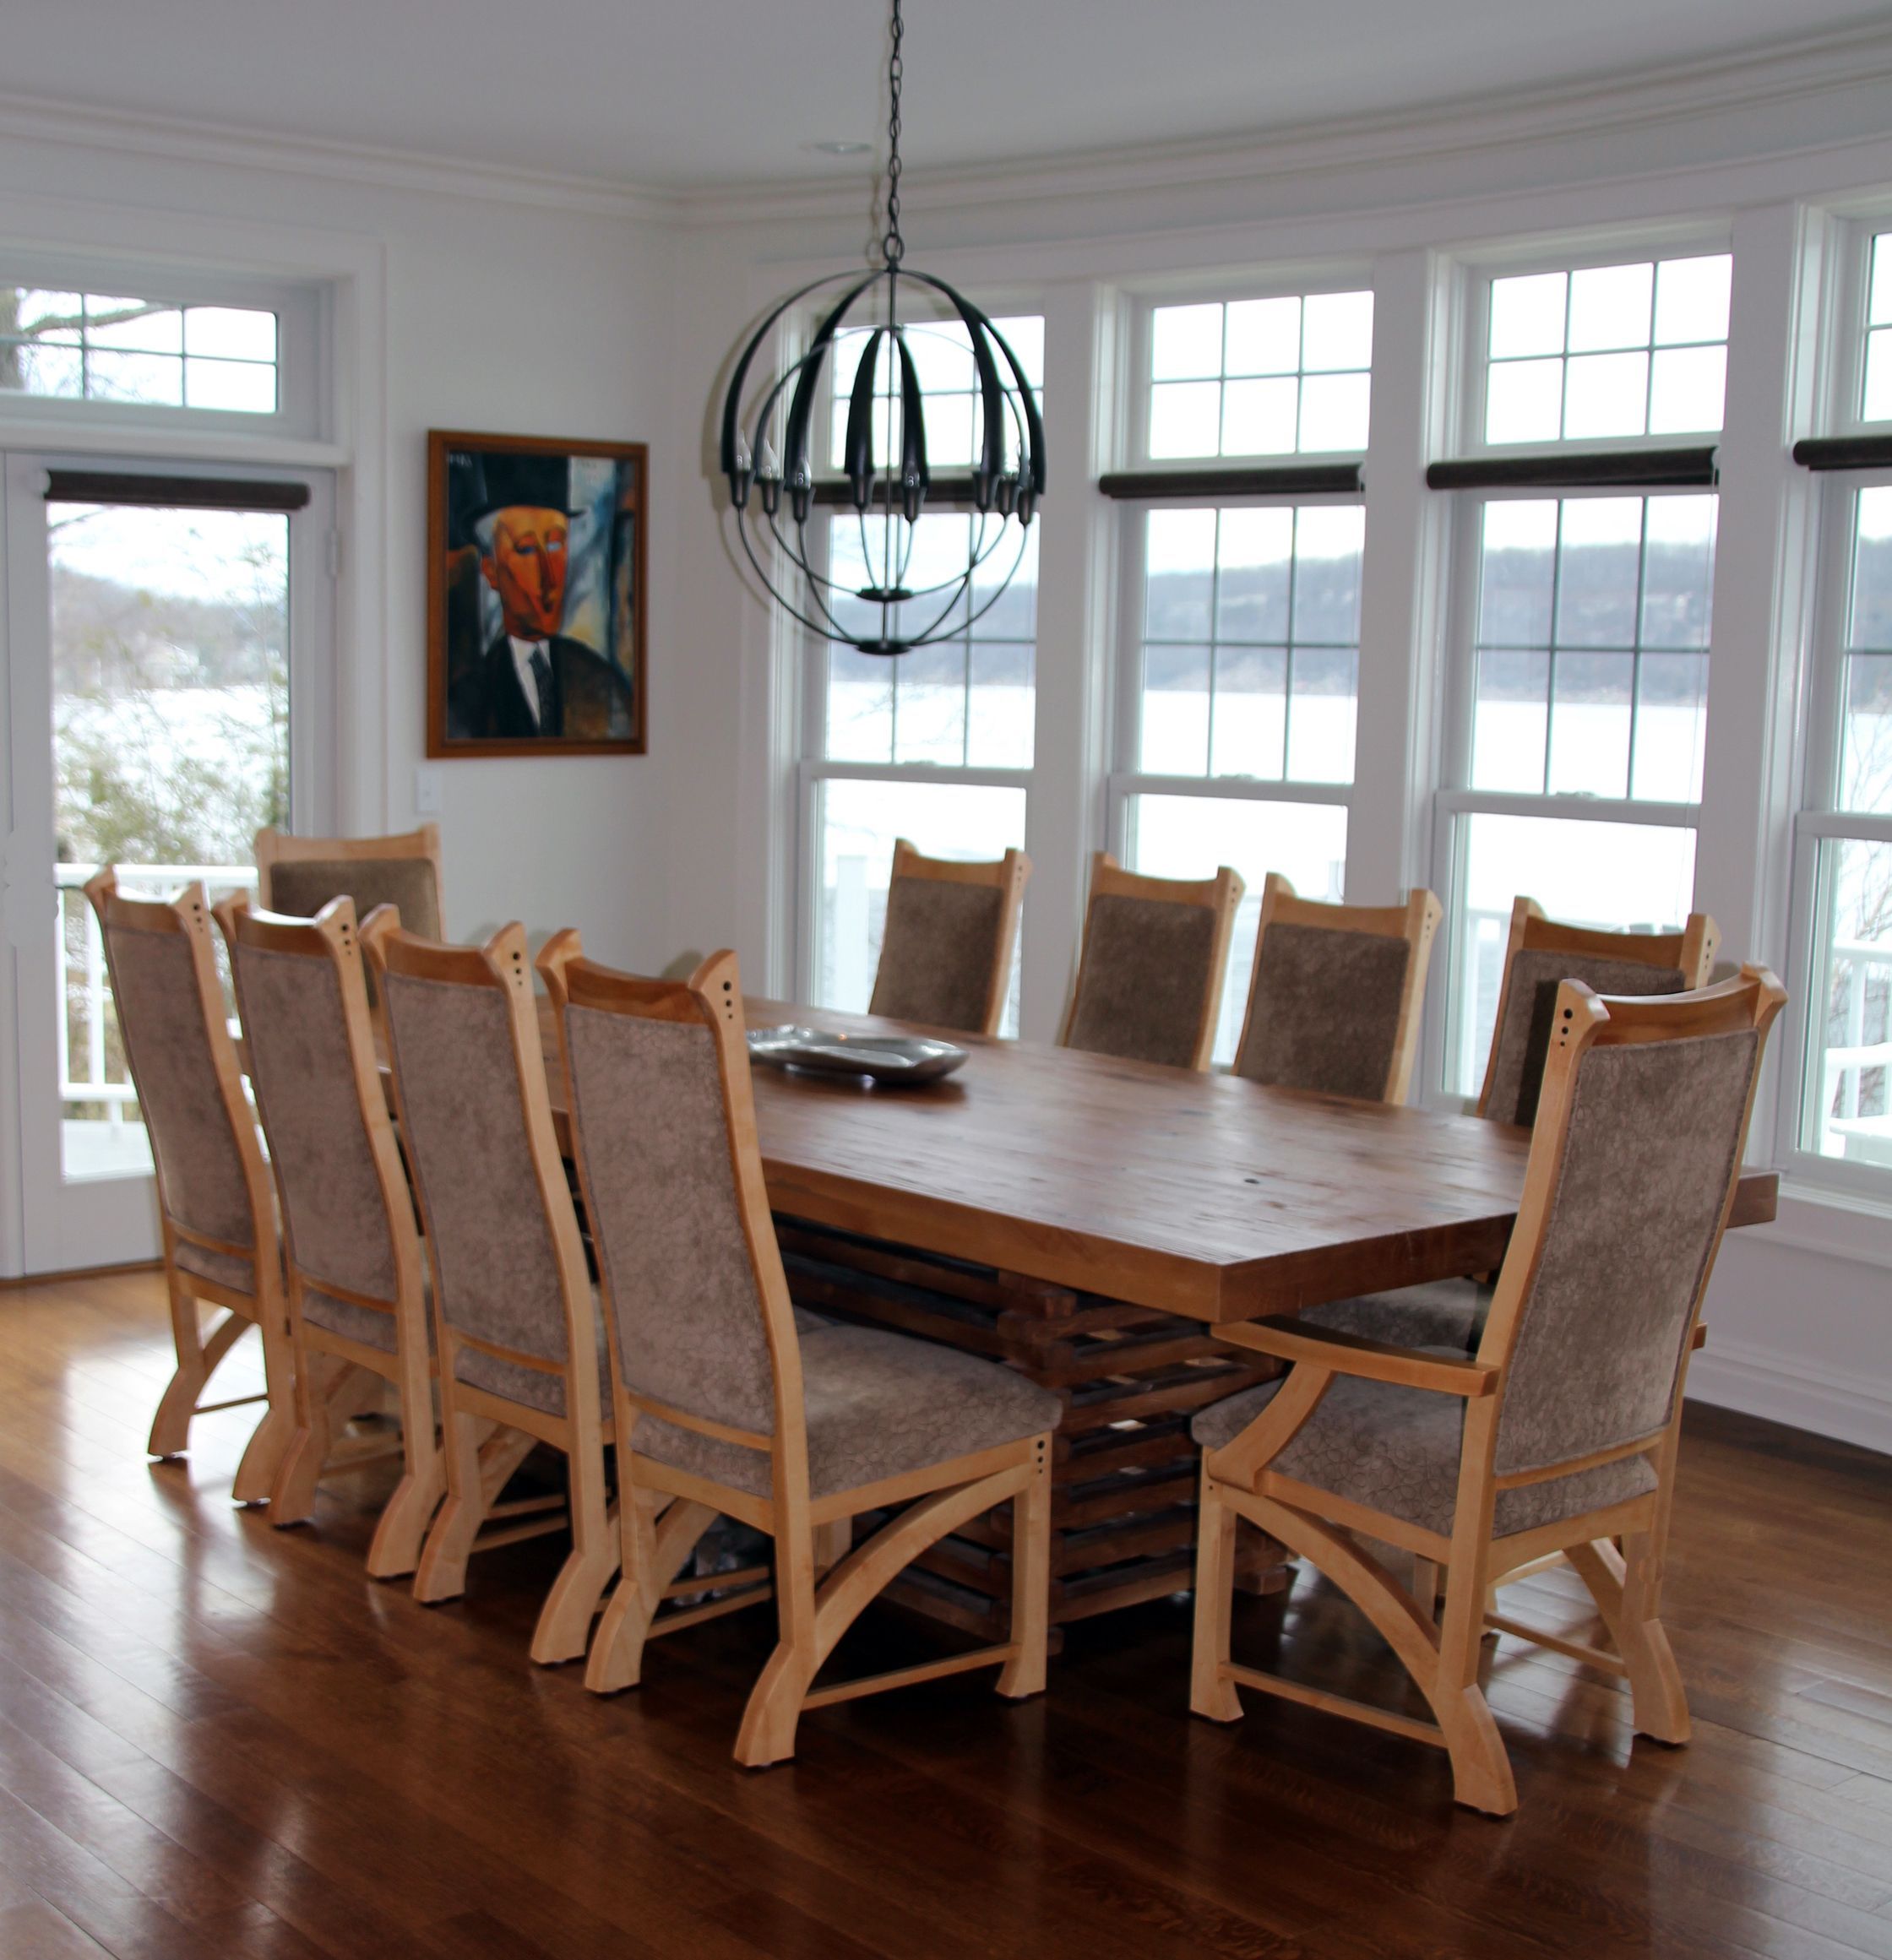 Handmade Chester Dining Chairs by Bearkat Wood